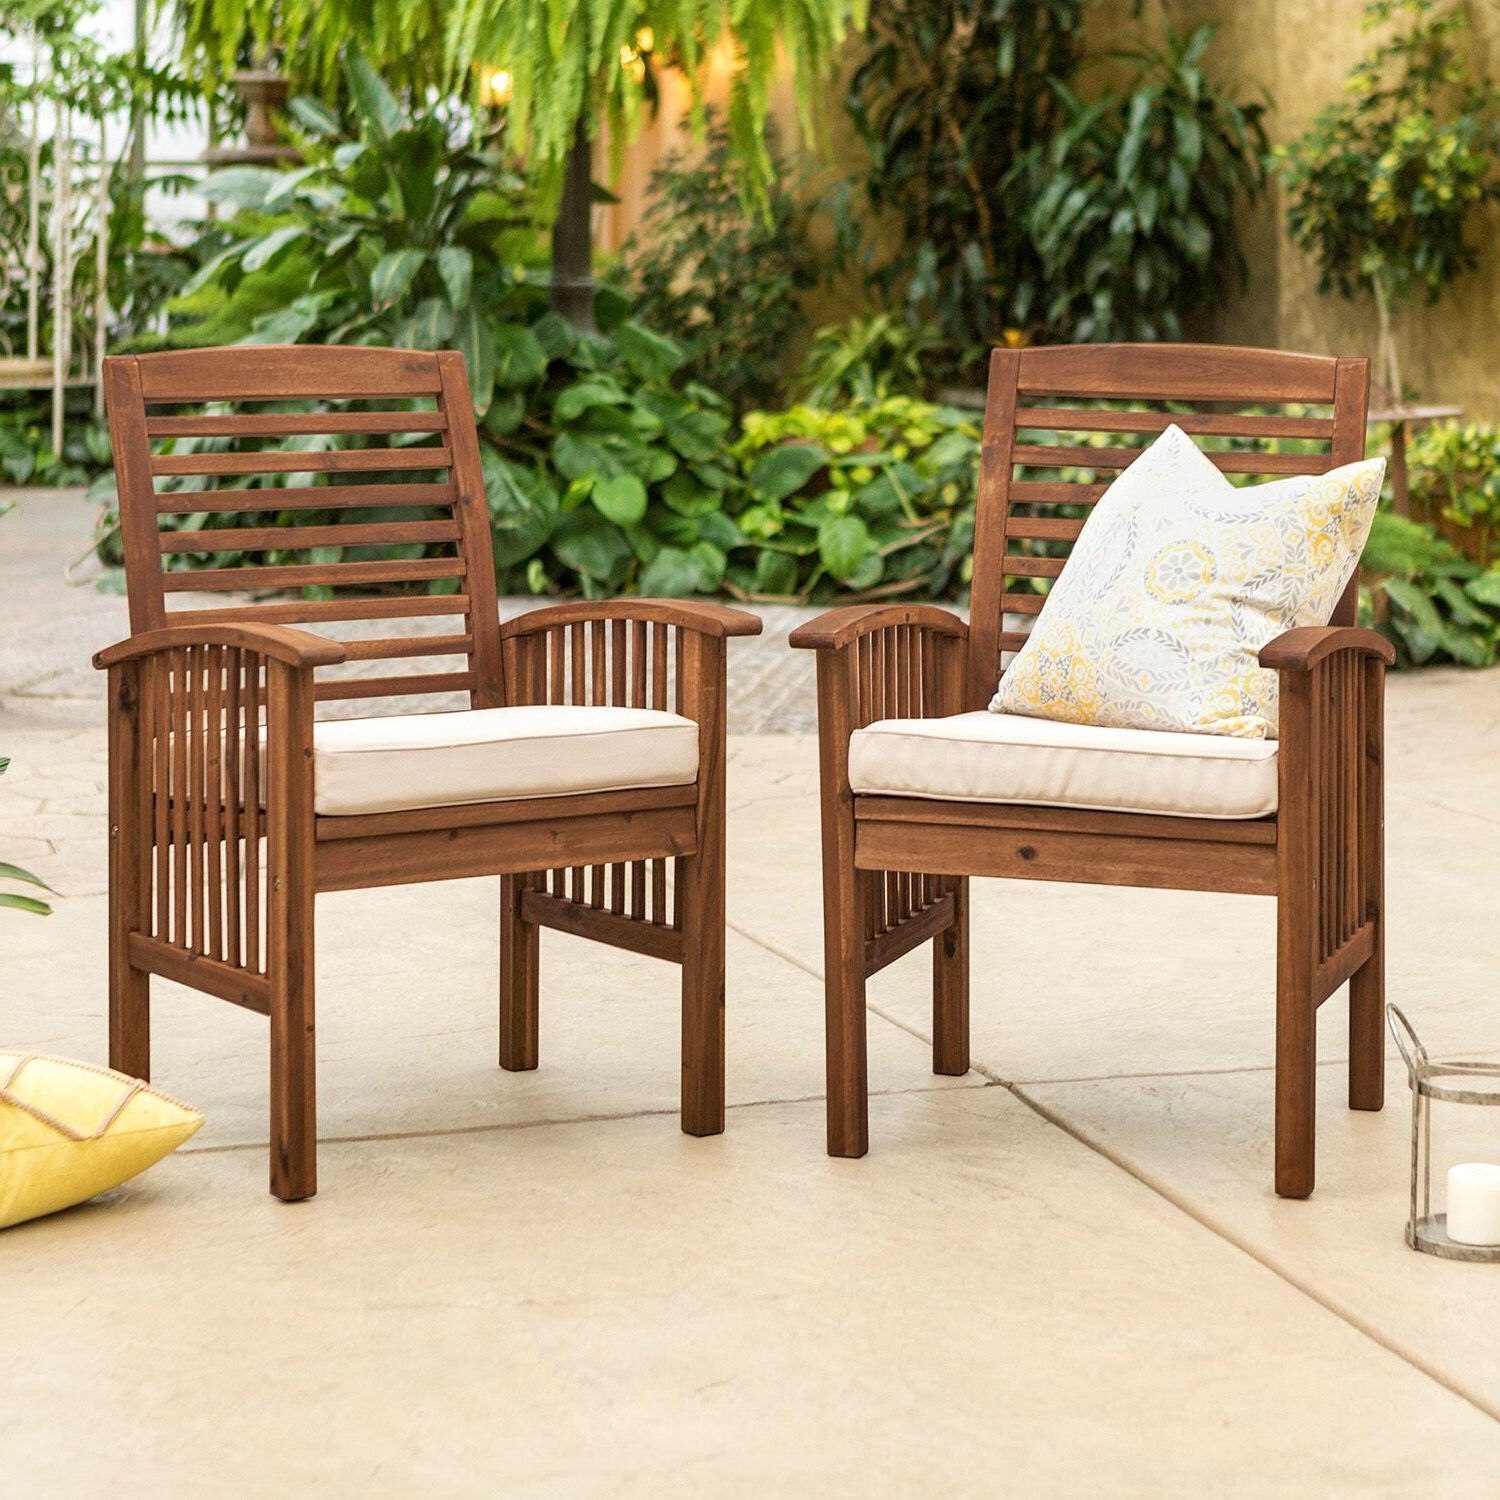 2019 Midland 2 Piece Dark Brown Acacia Patio Dining Arm Chair Set W/ Natural Throughout Natural Wood Outdoor Chairs (View 6 of 15)